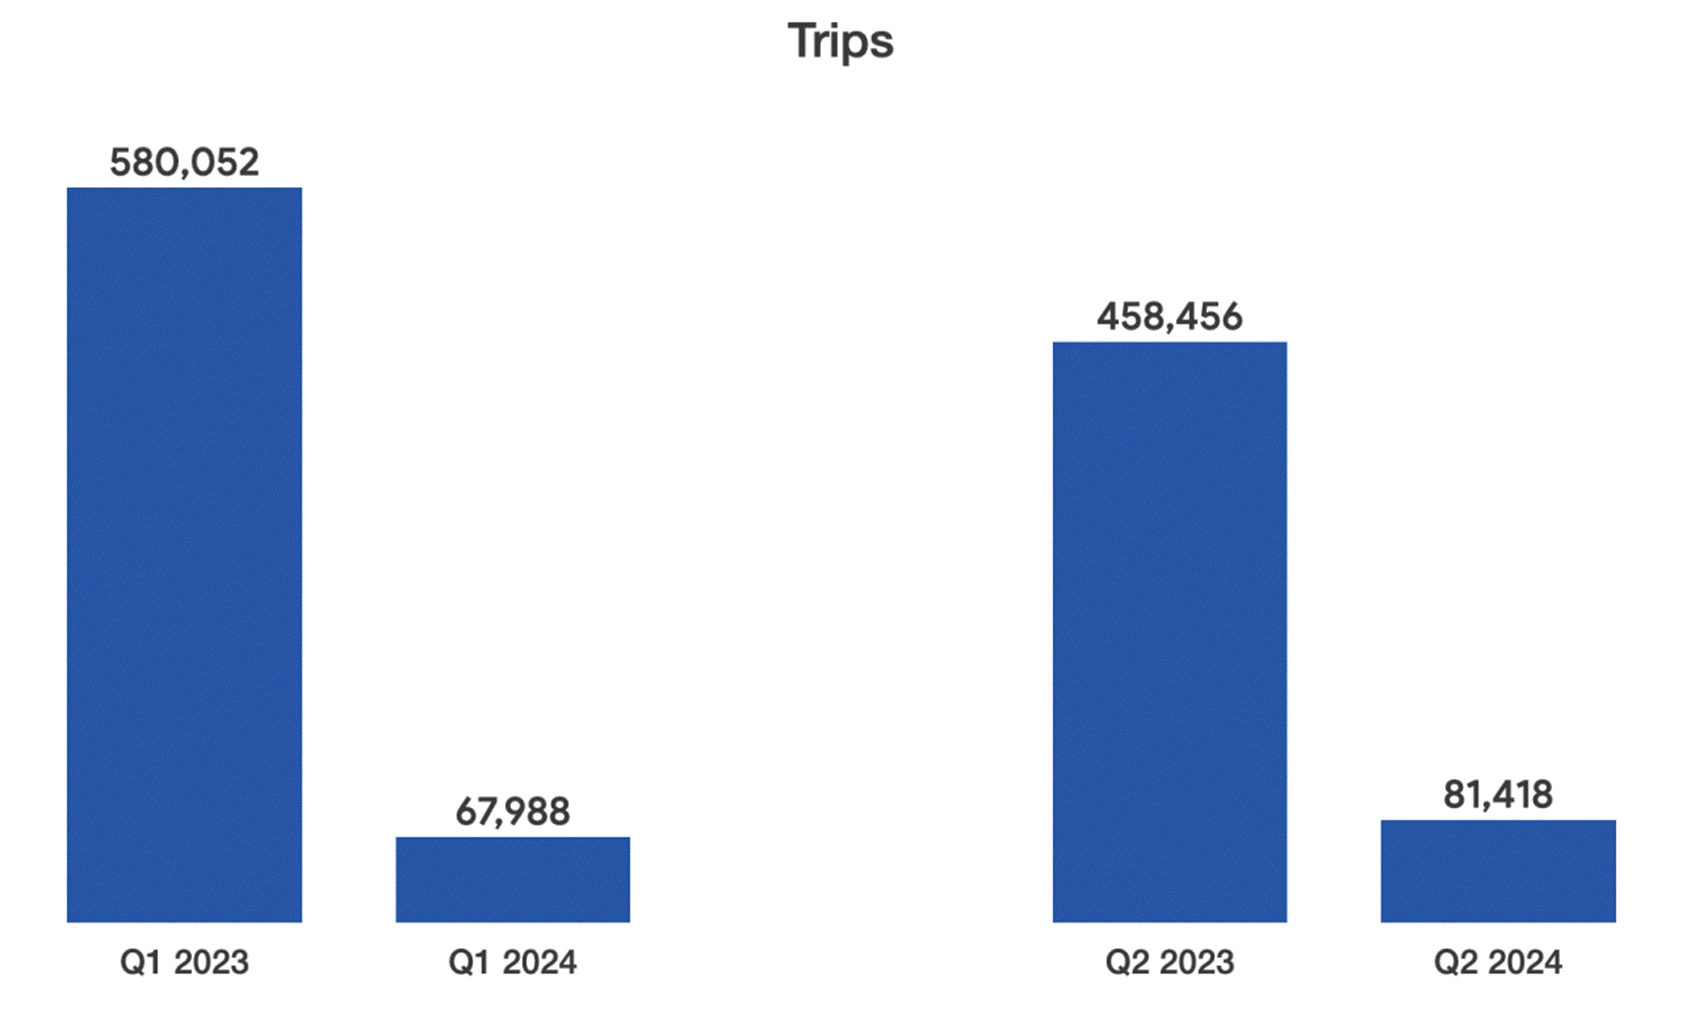 A graph of trips and trips

Description automatically generated with medium confidence